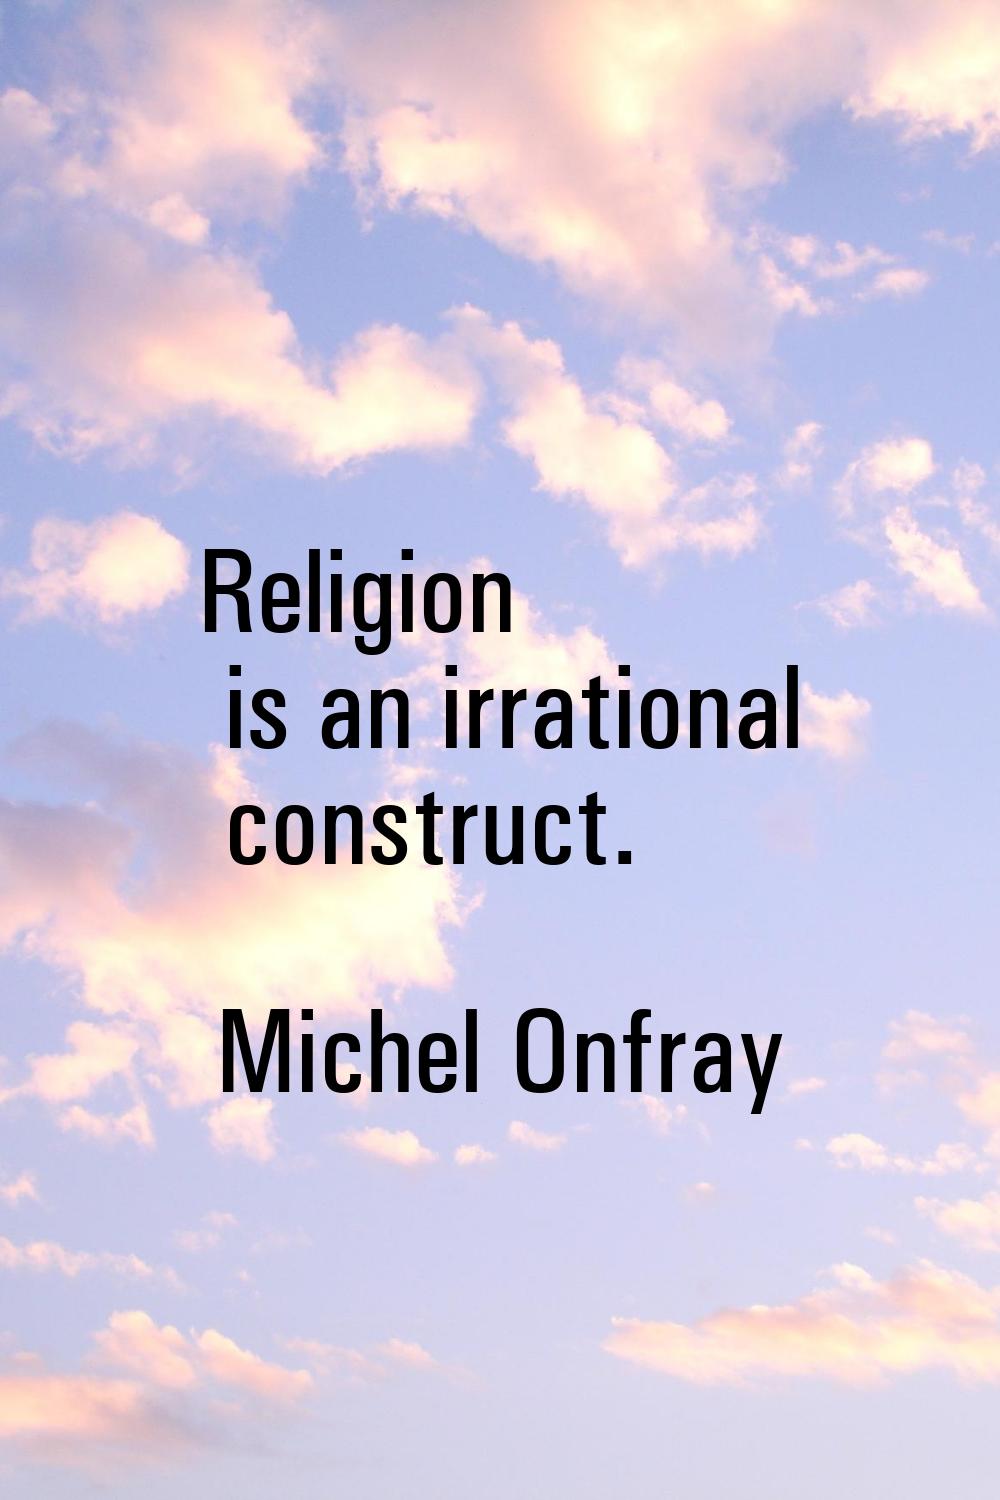 Religion is an irrational construct.